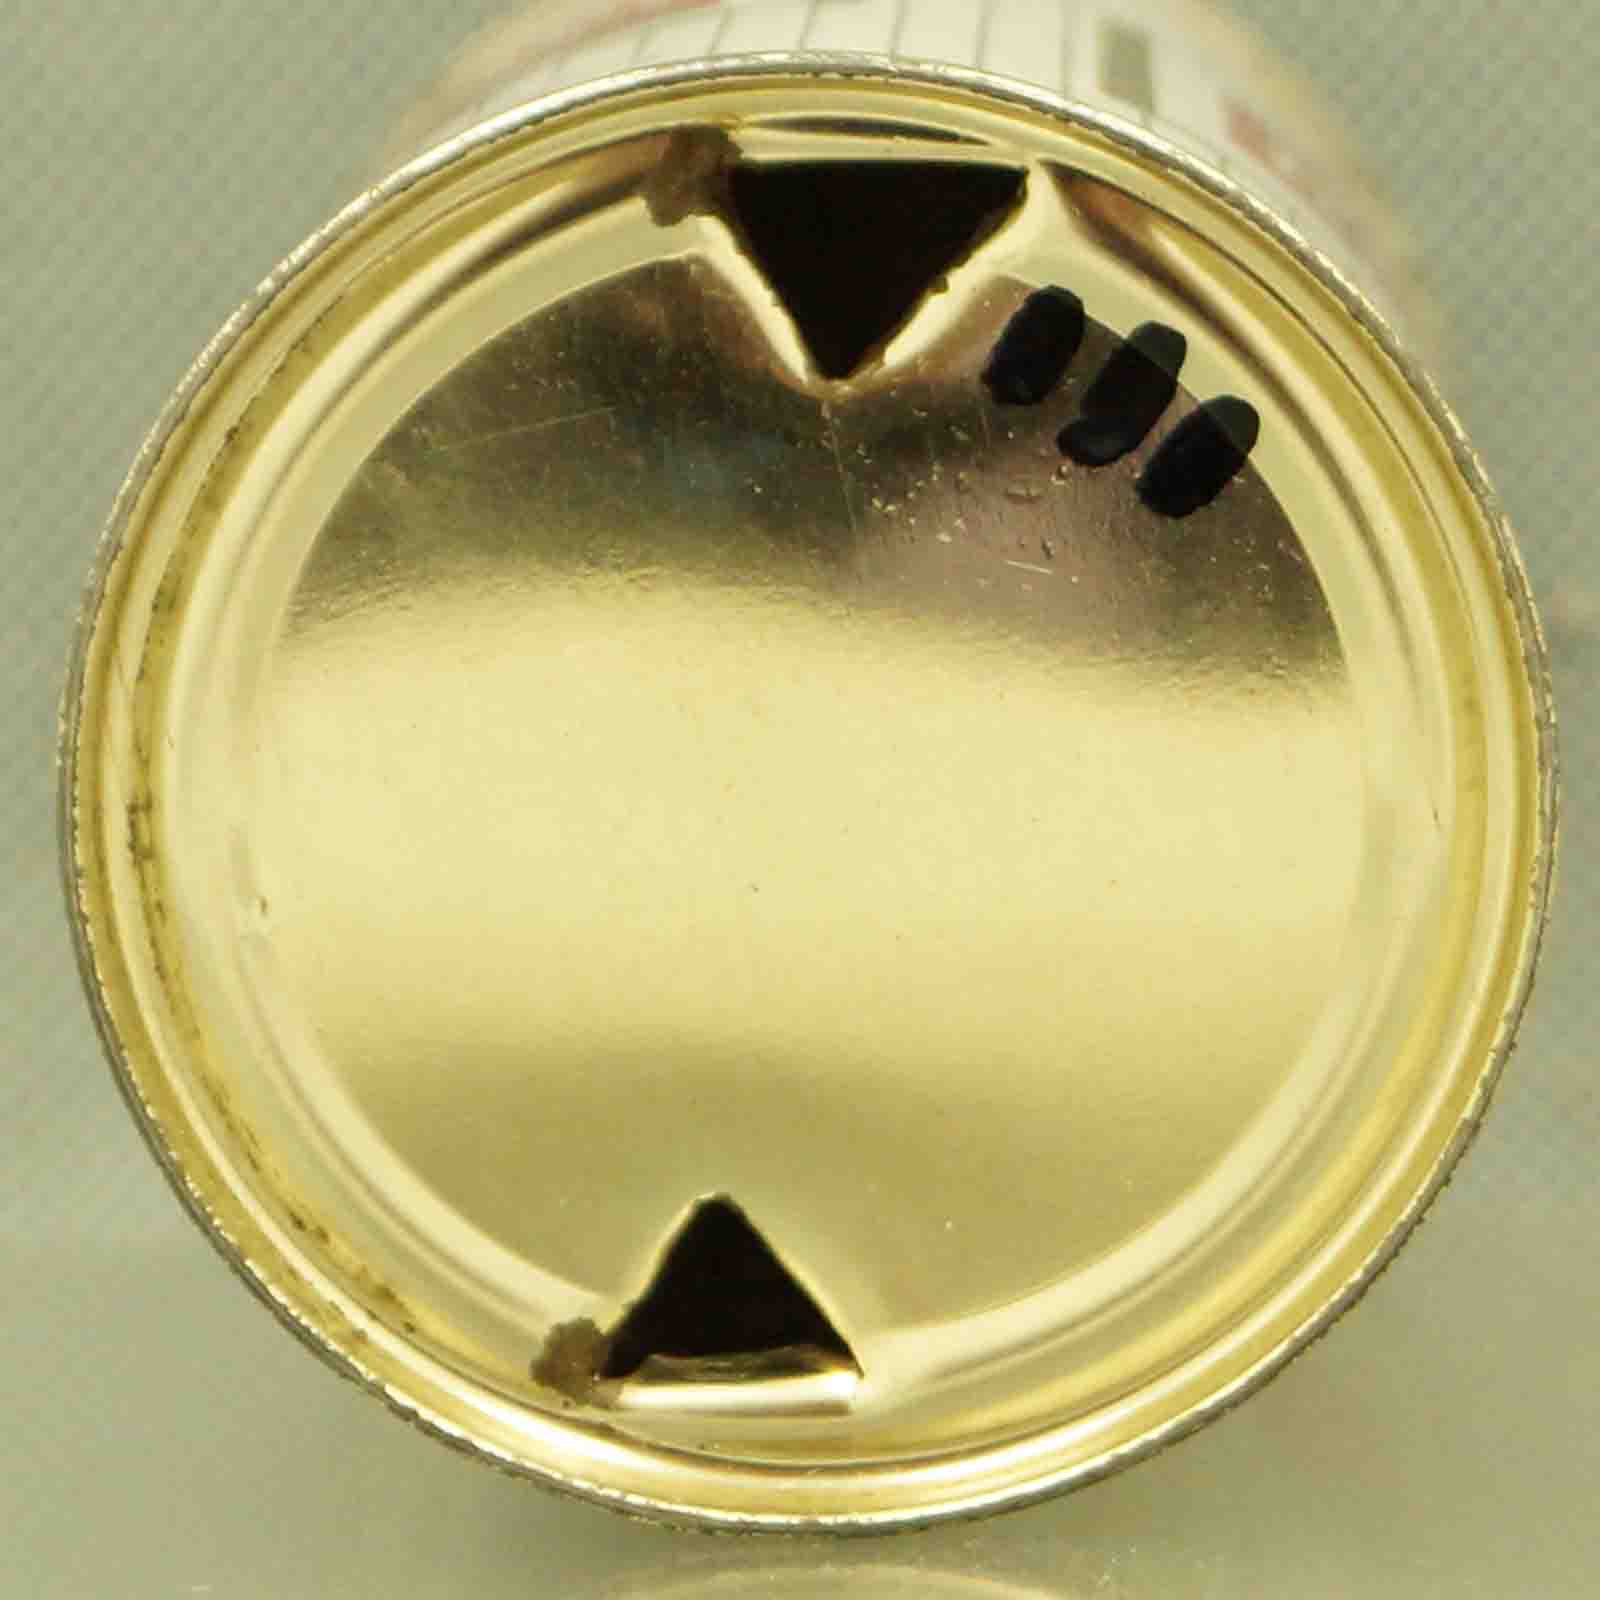 braumeister 41-17 flat top beer can 6